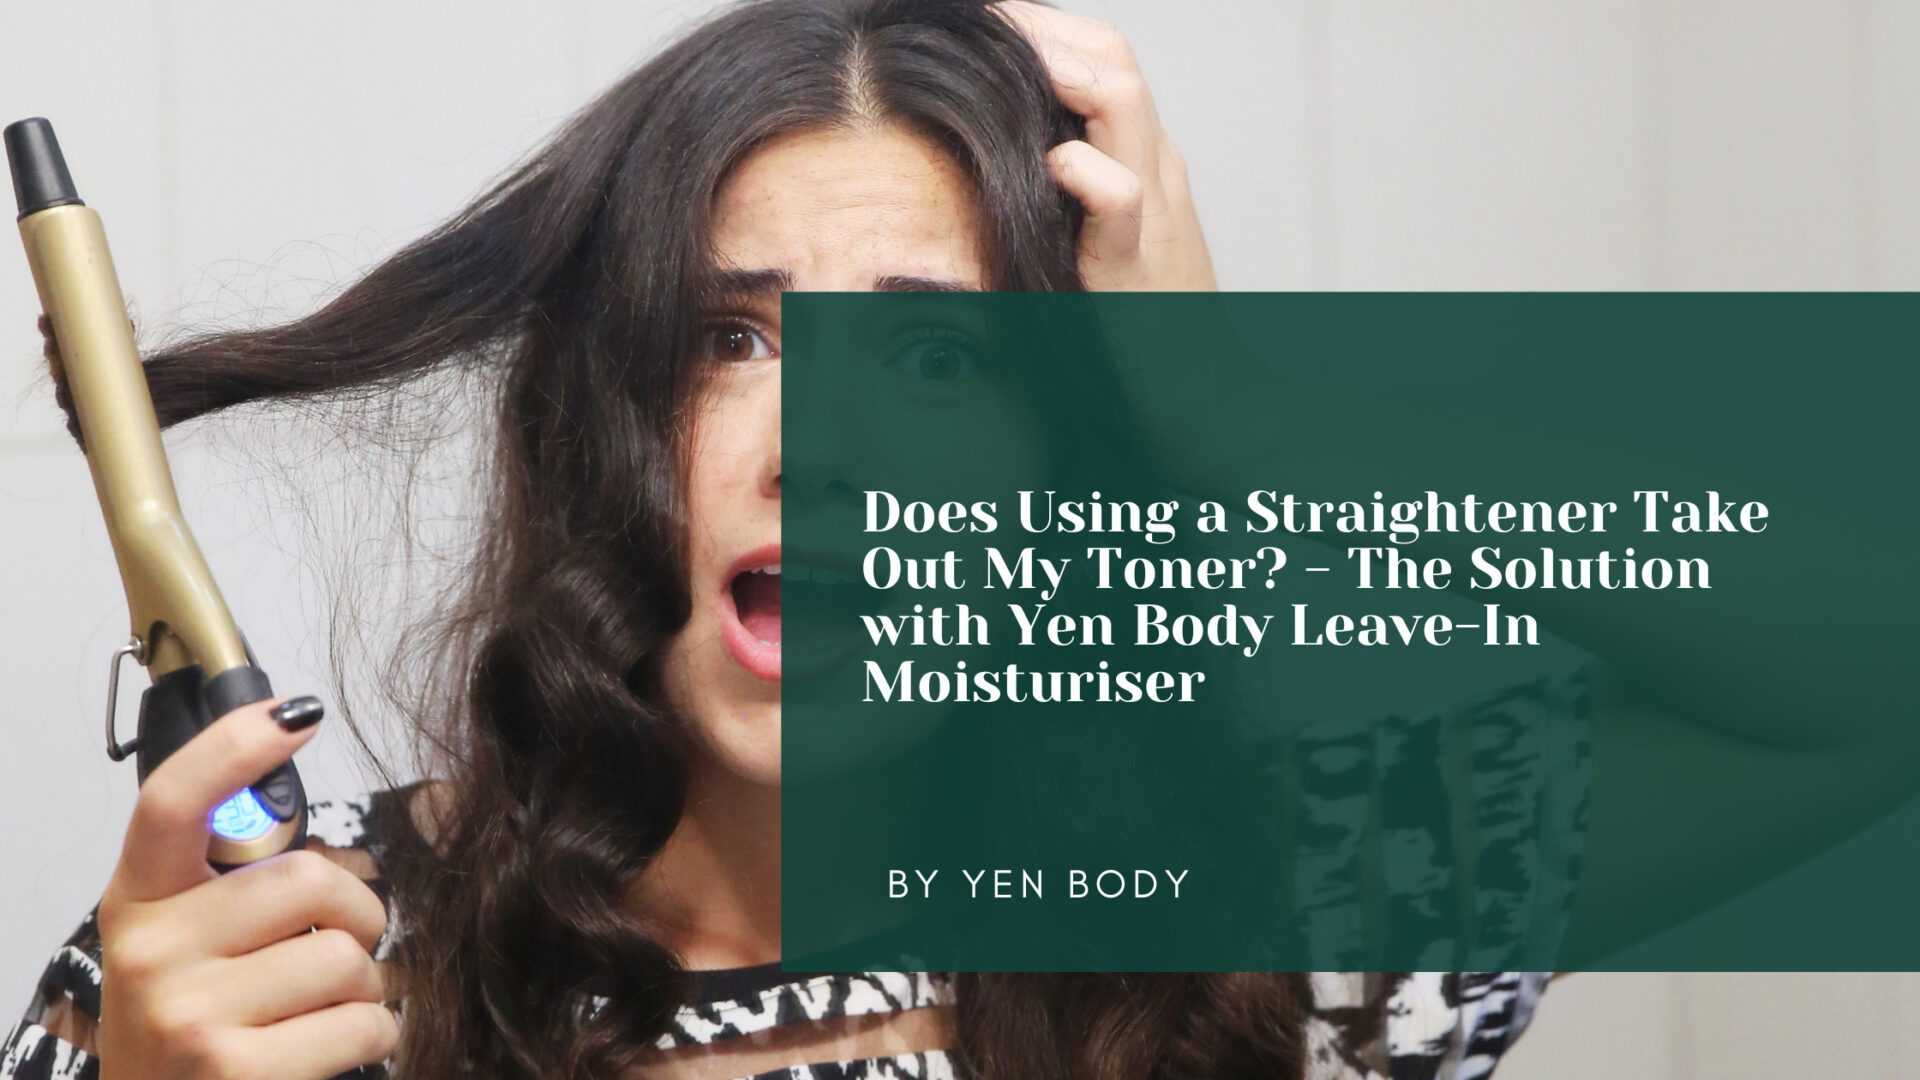 Does Using a Straightener Take Out My Toner? - The Solution with Yen Body Leave-In Moisturiser